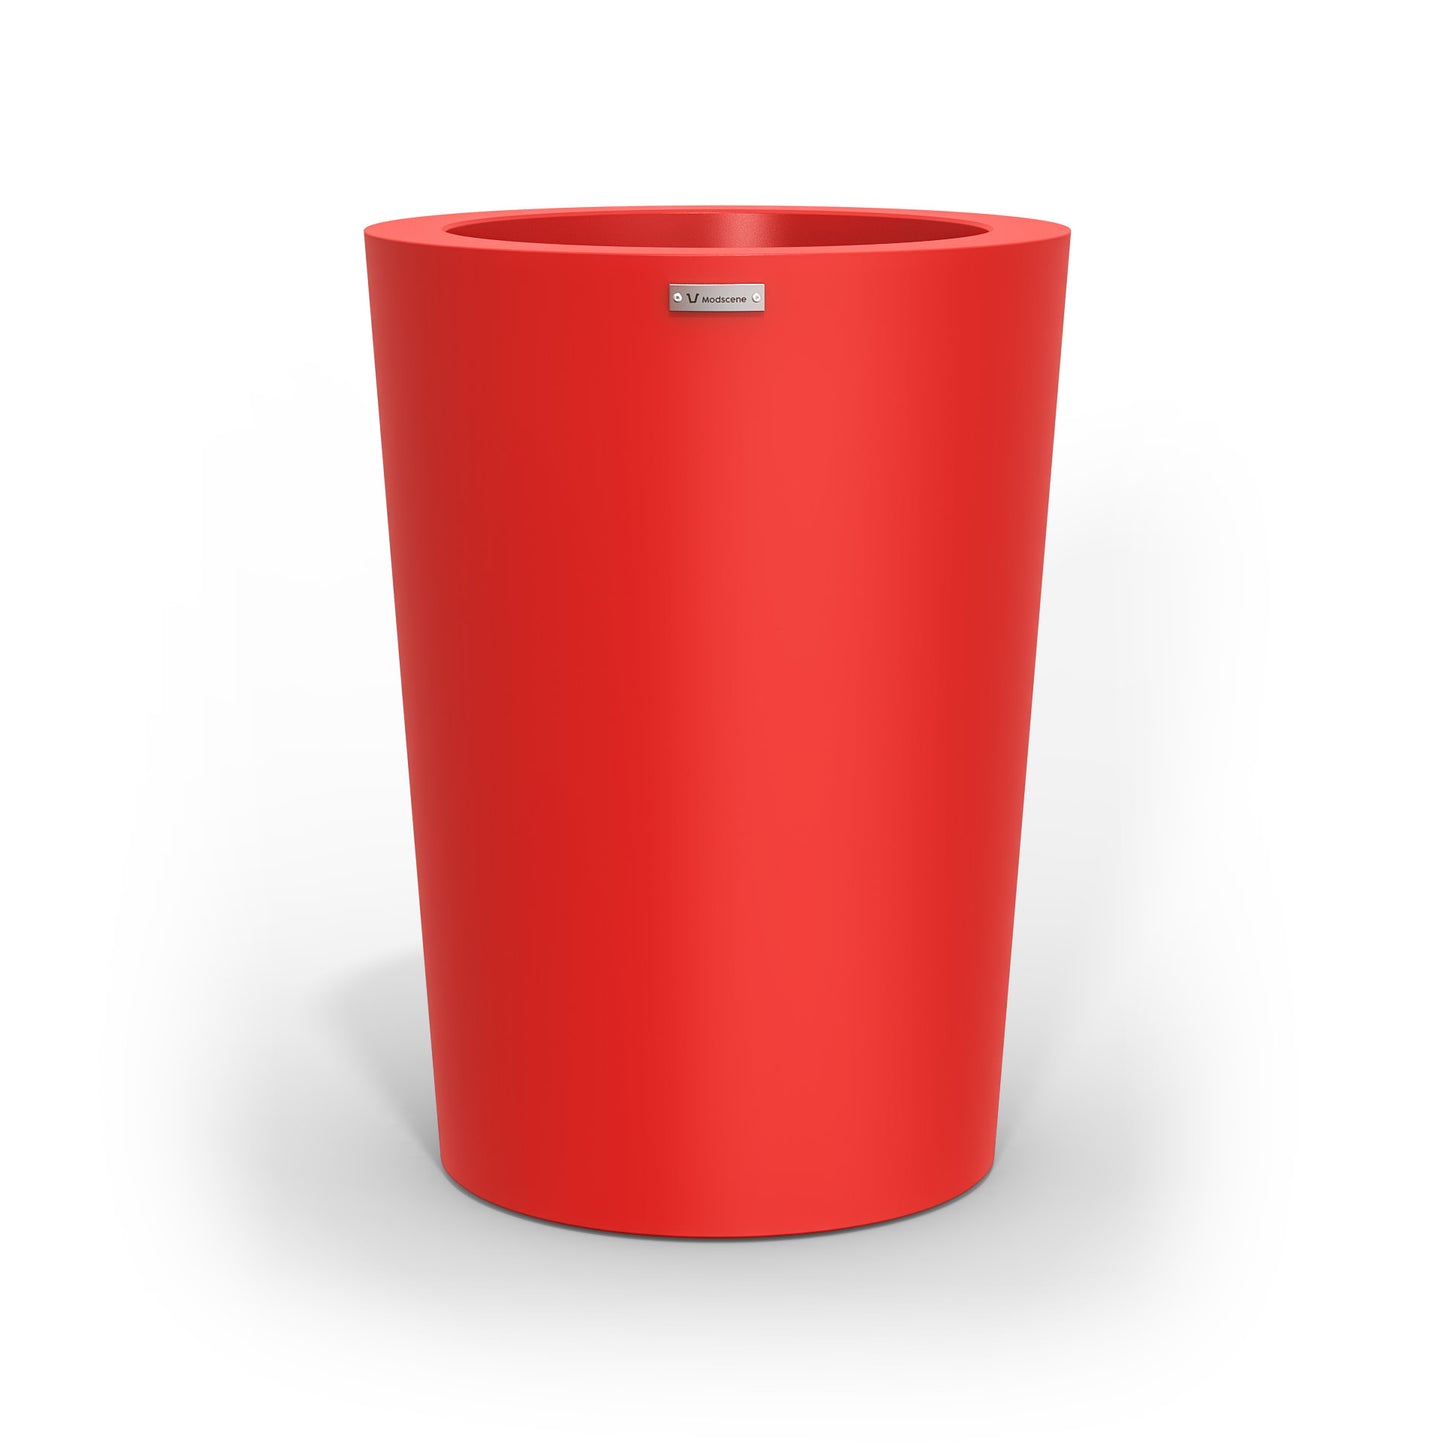 A modern style planter pot in red. Made by Modscene New Zealand.